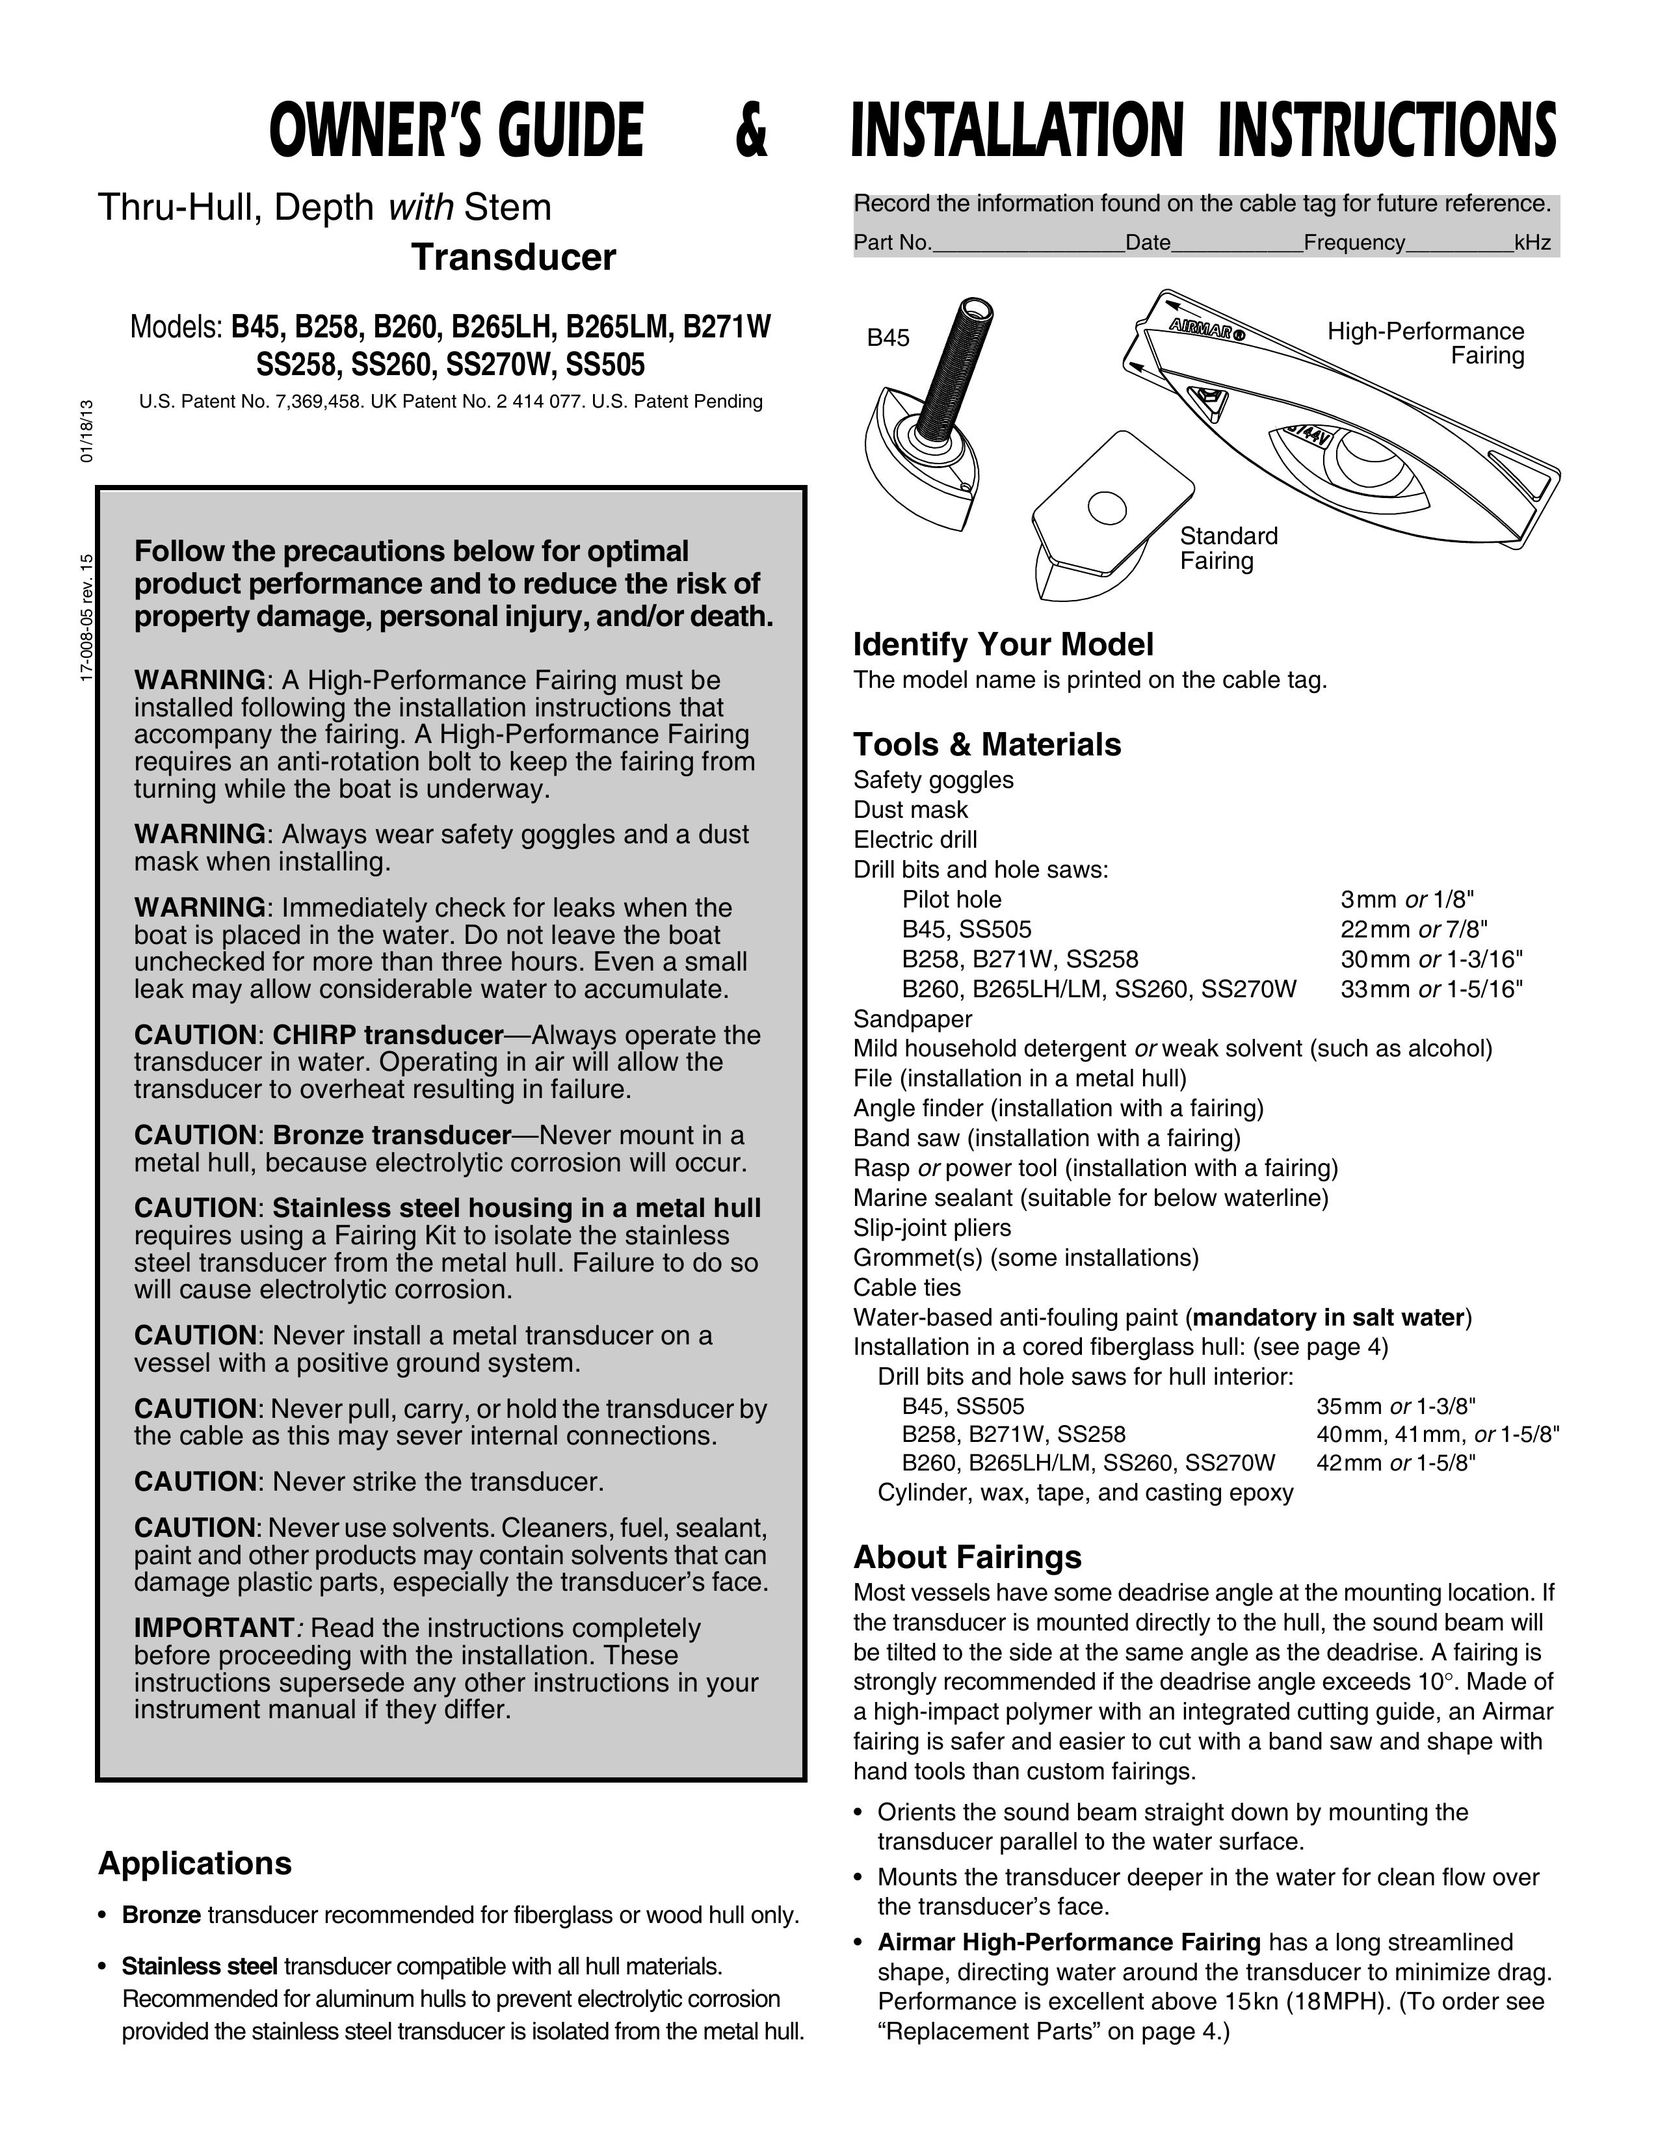 New Transducers B45 Network Router User Manual